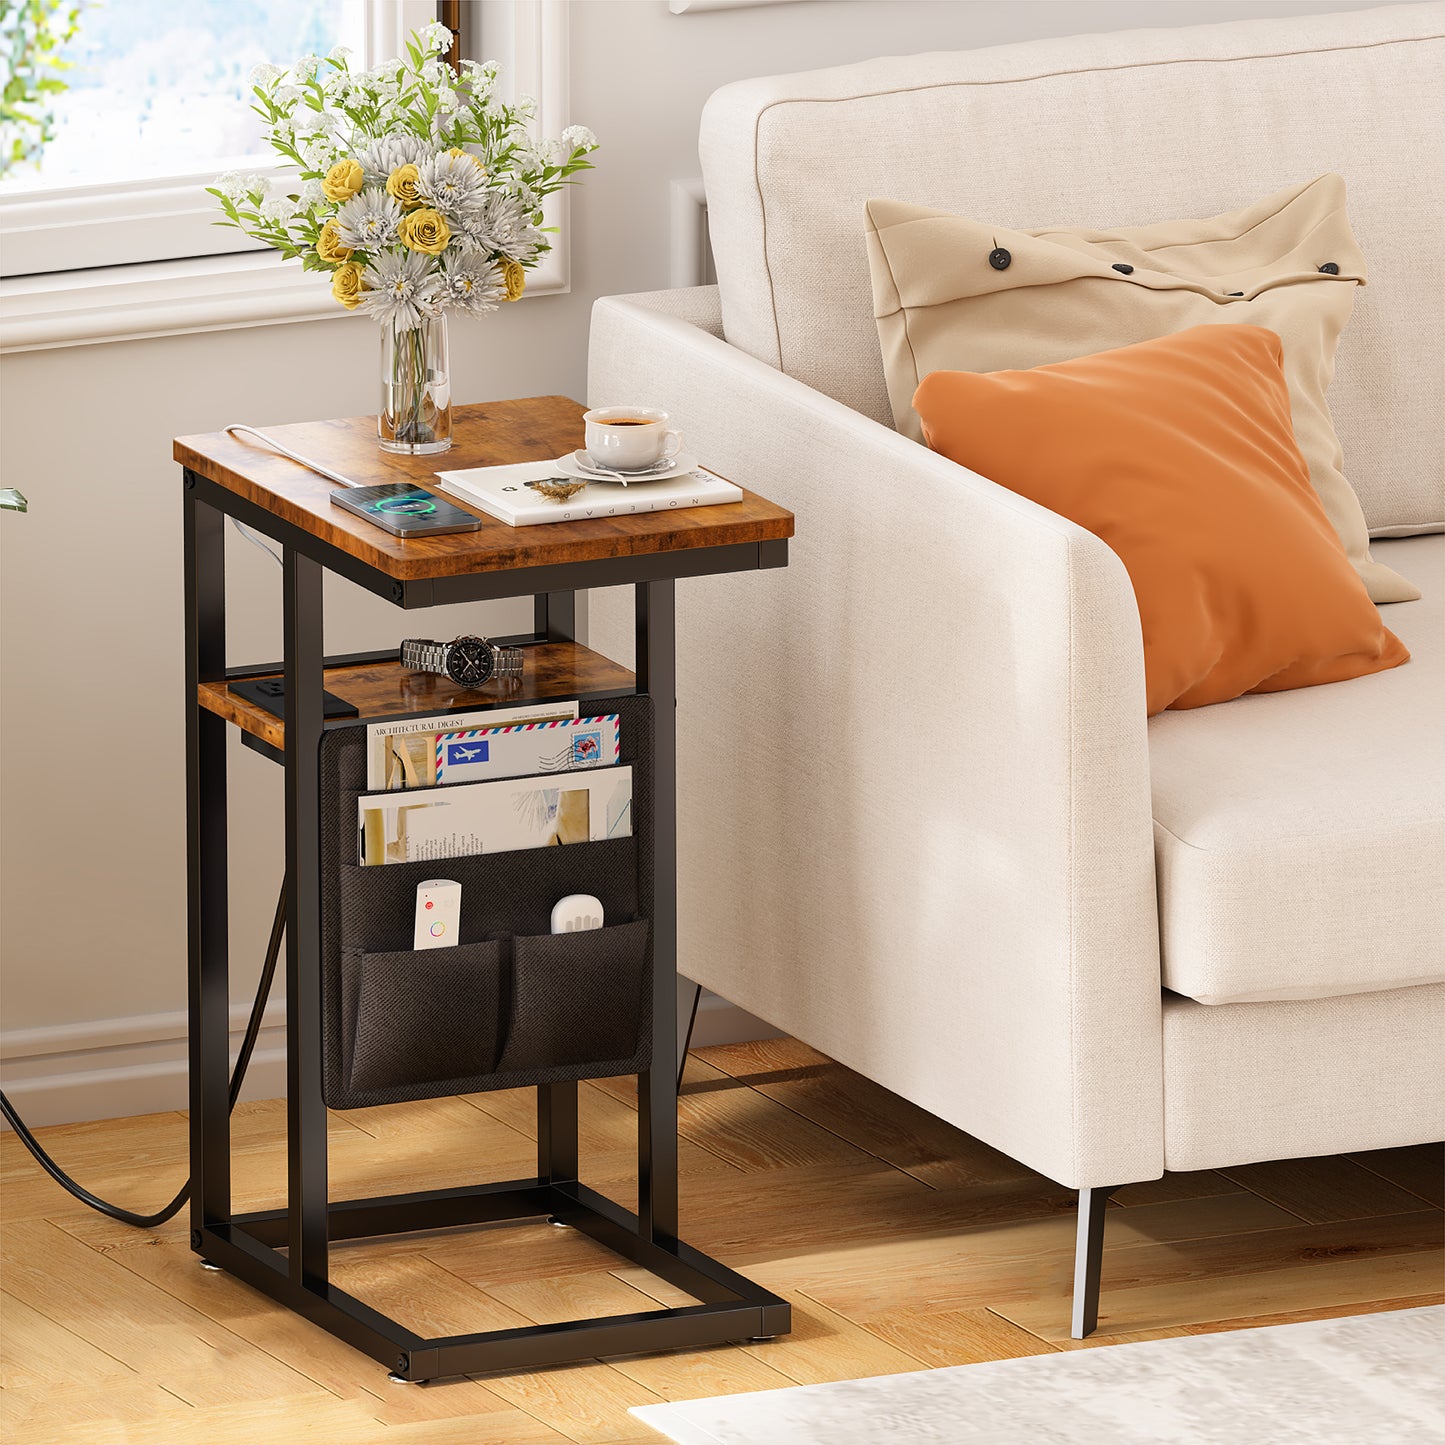 SUPERJARE C Shaped End Table with Charging Station, Side Table with Storage Bag, Couch Table, C Table with USB Port and Outlet, for Living Room, Bed Room, Rustic Brown